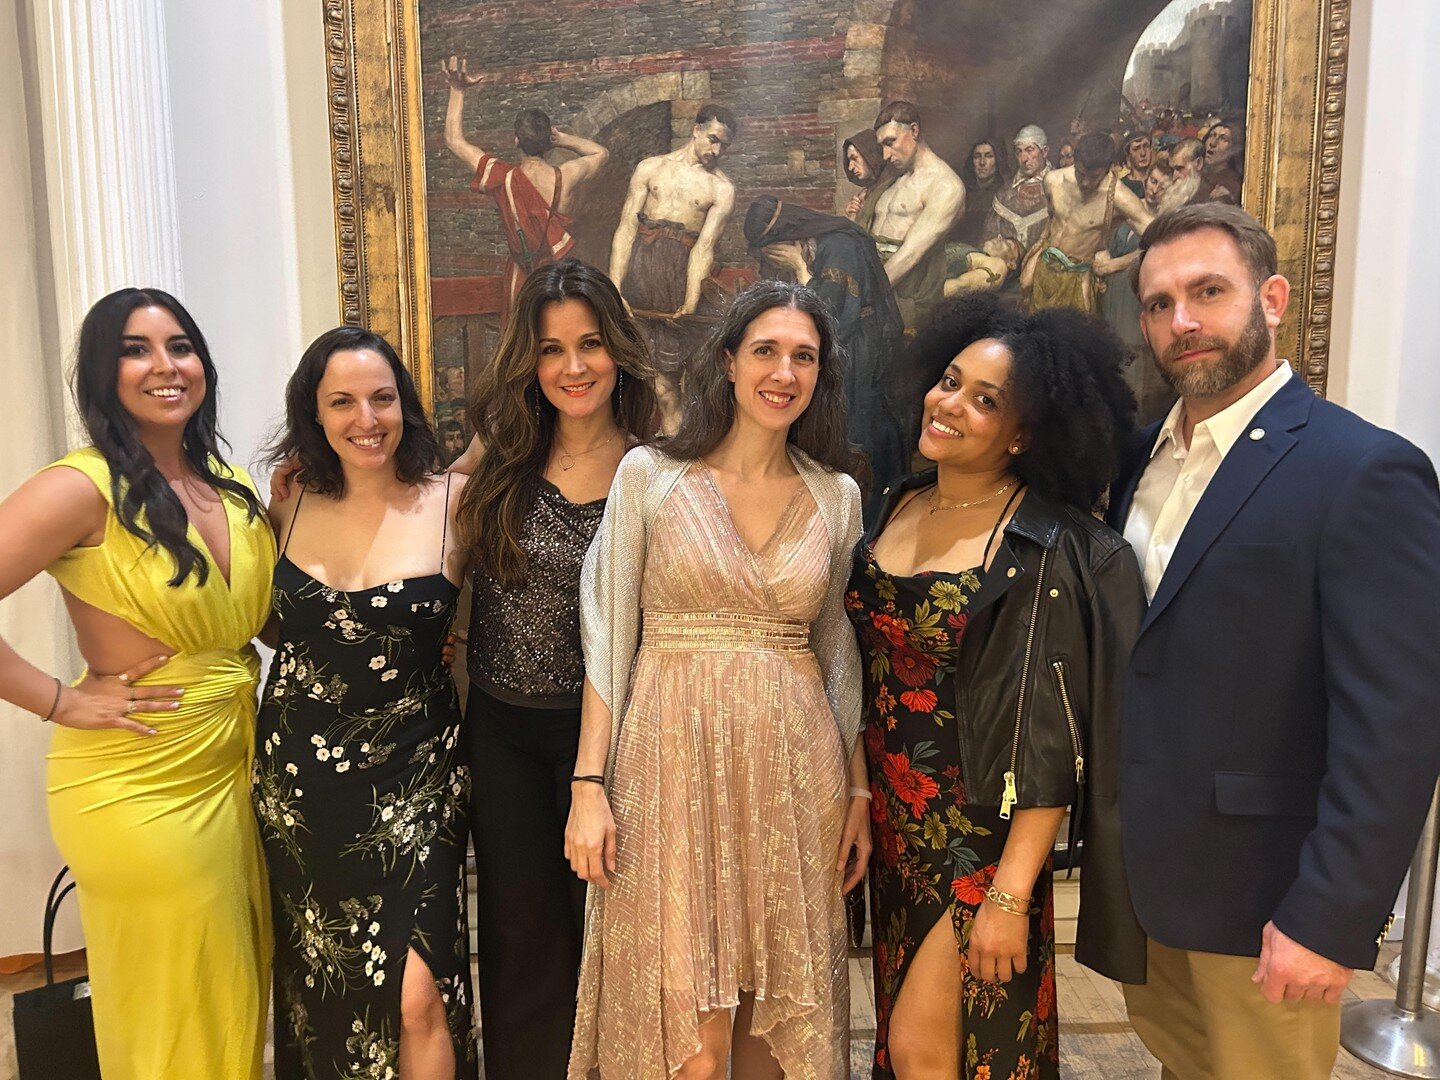 This week's Tribeca Ball honoring @asherald at the @newyorkacademyofart was a blast. Amy Sherald in turn honored her teacher and mentor @artorolinday_ and established a new scholarship in his name, truly moving. Thanks @rickdavidman and @dfn_gallery 